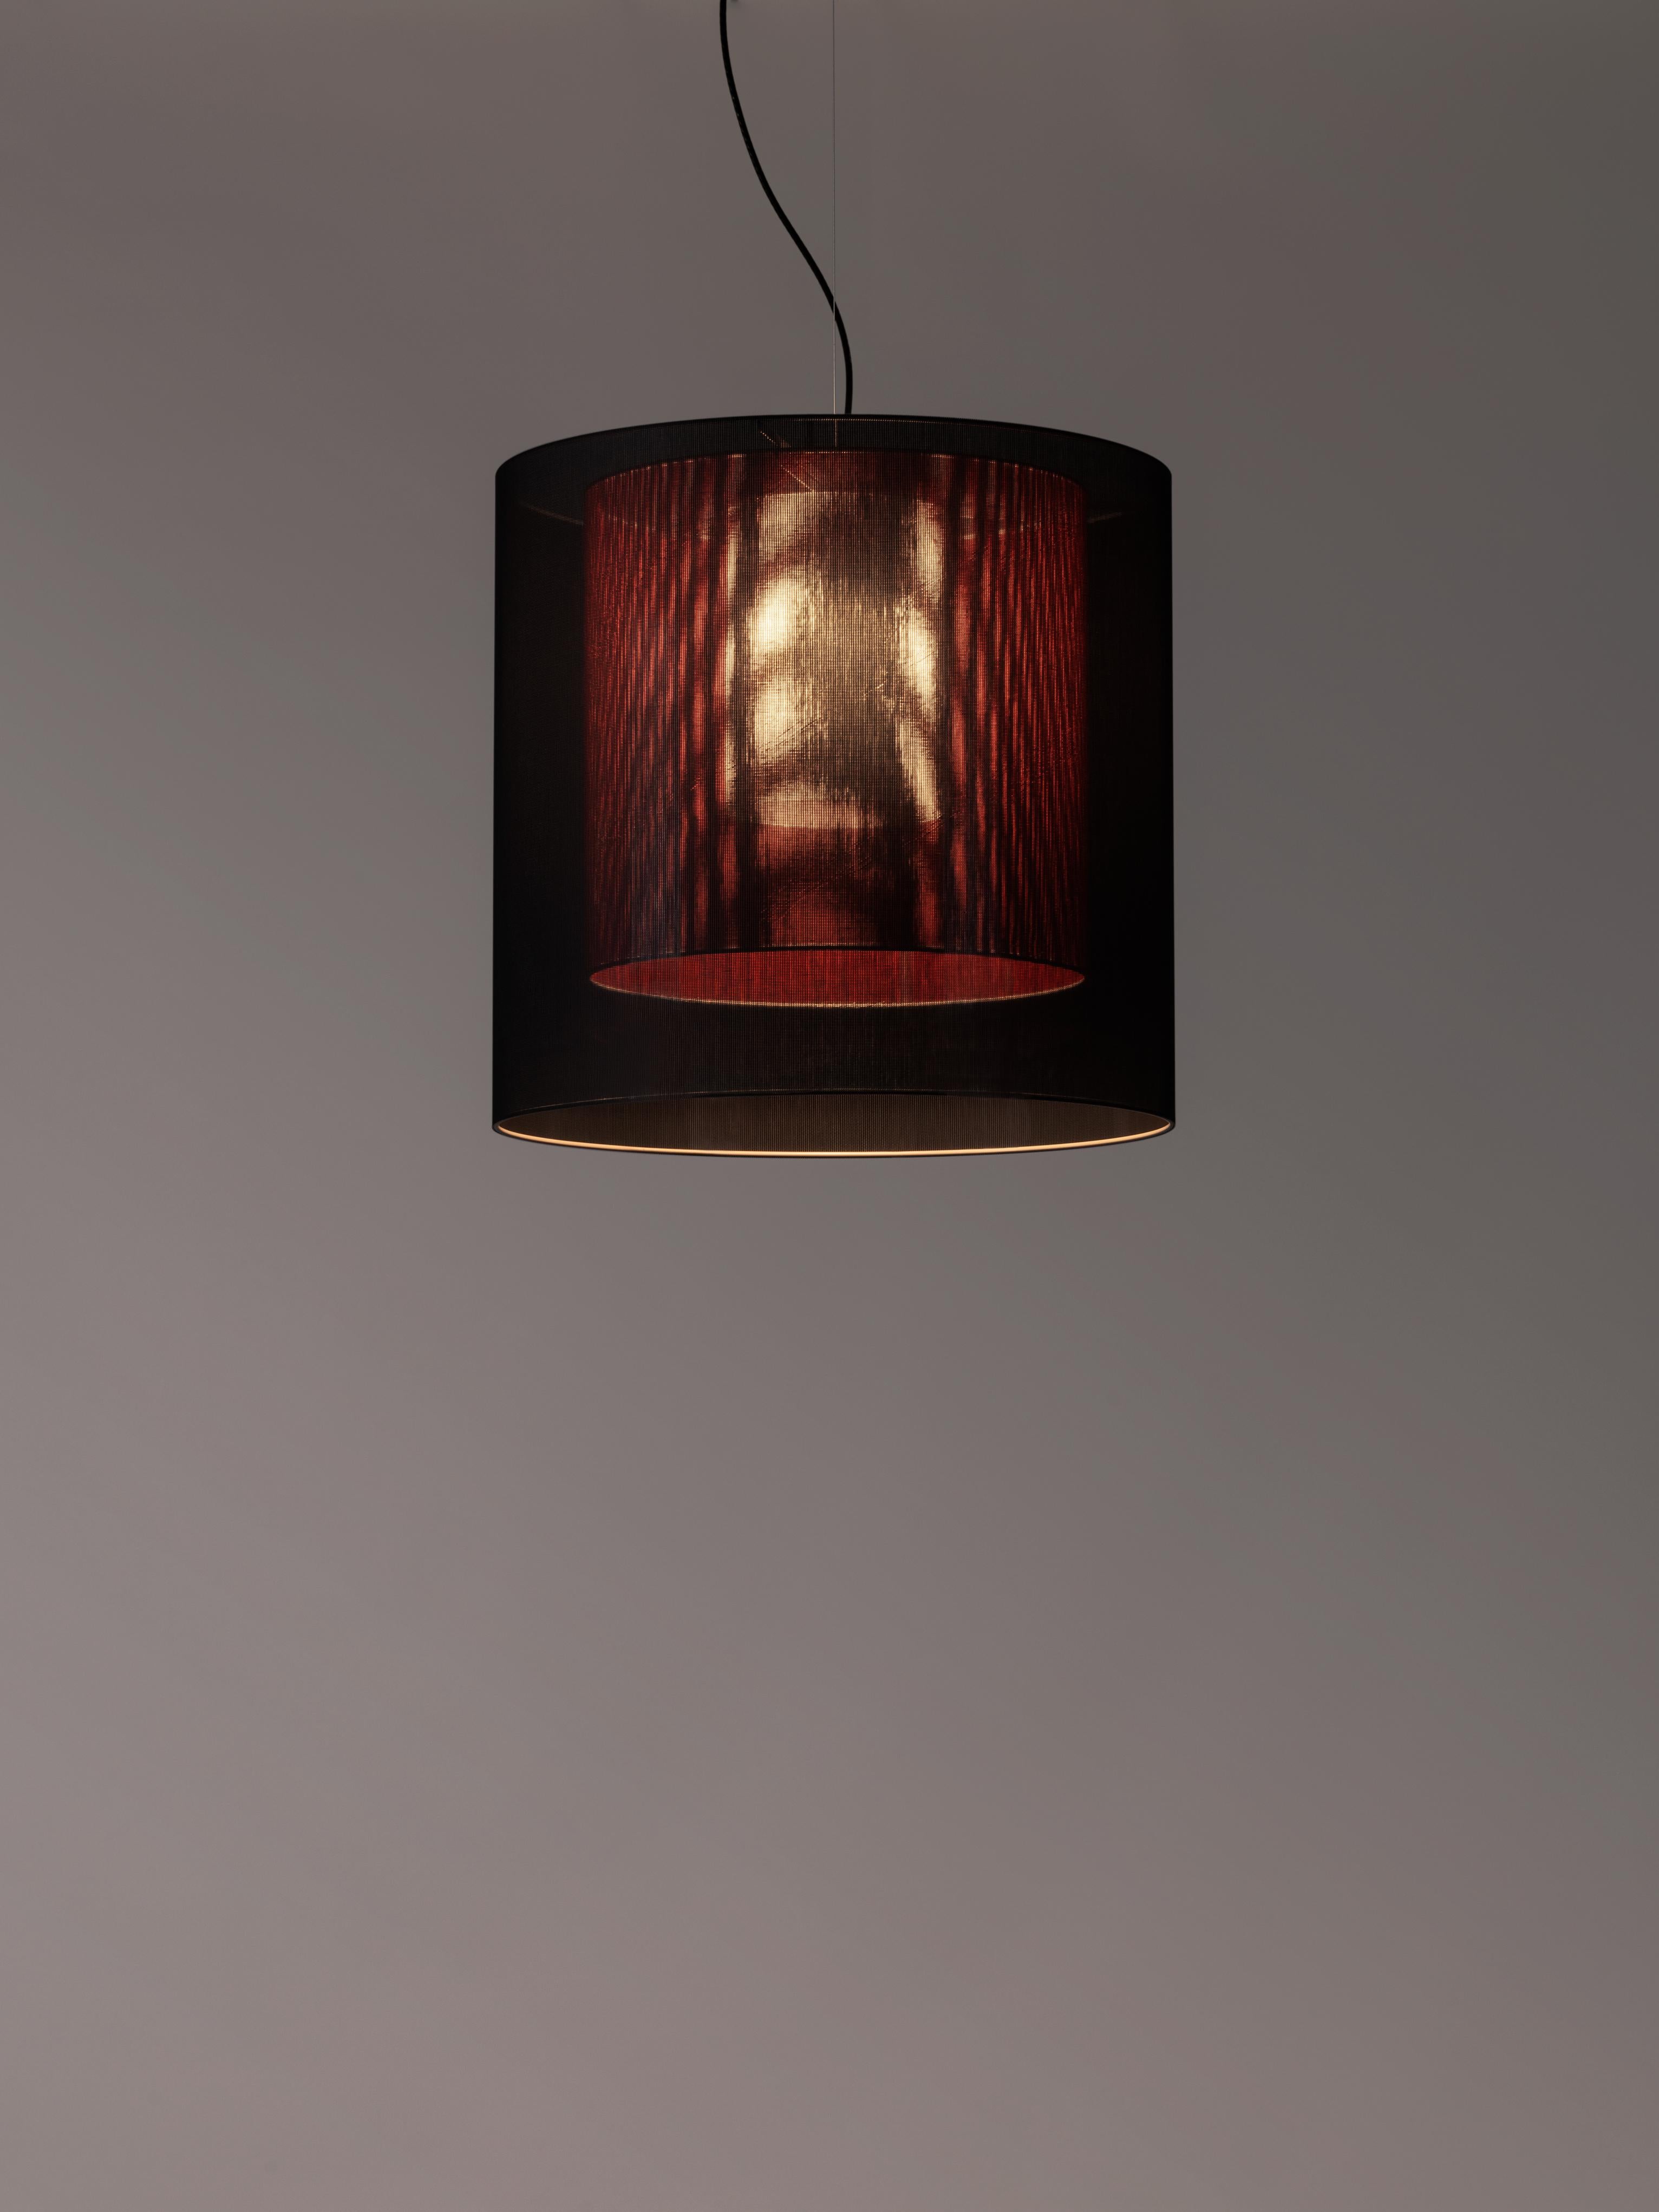 Black and red Moaré LM pendant lamp by Antoni Arola
Dimensions: D 62 x H 60 cm
Materials: Metal, polyester.
Available in other colors and sizes.

Moaré’s multiple combinations of formats and colours make it highly versatile. The series takes